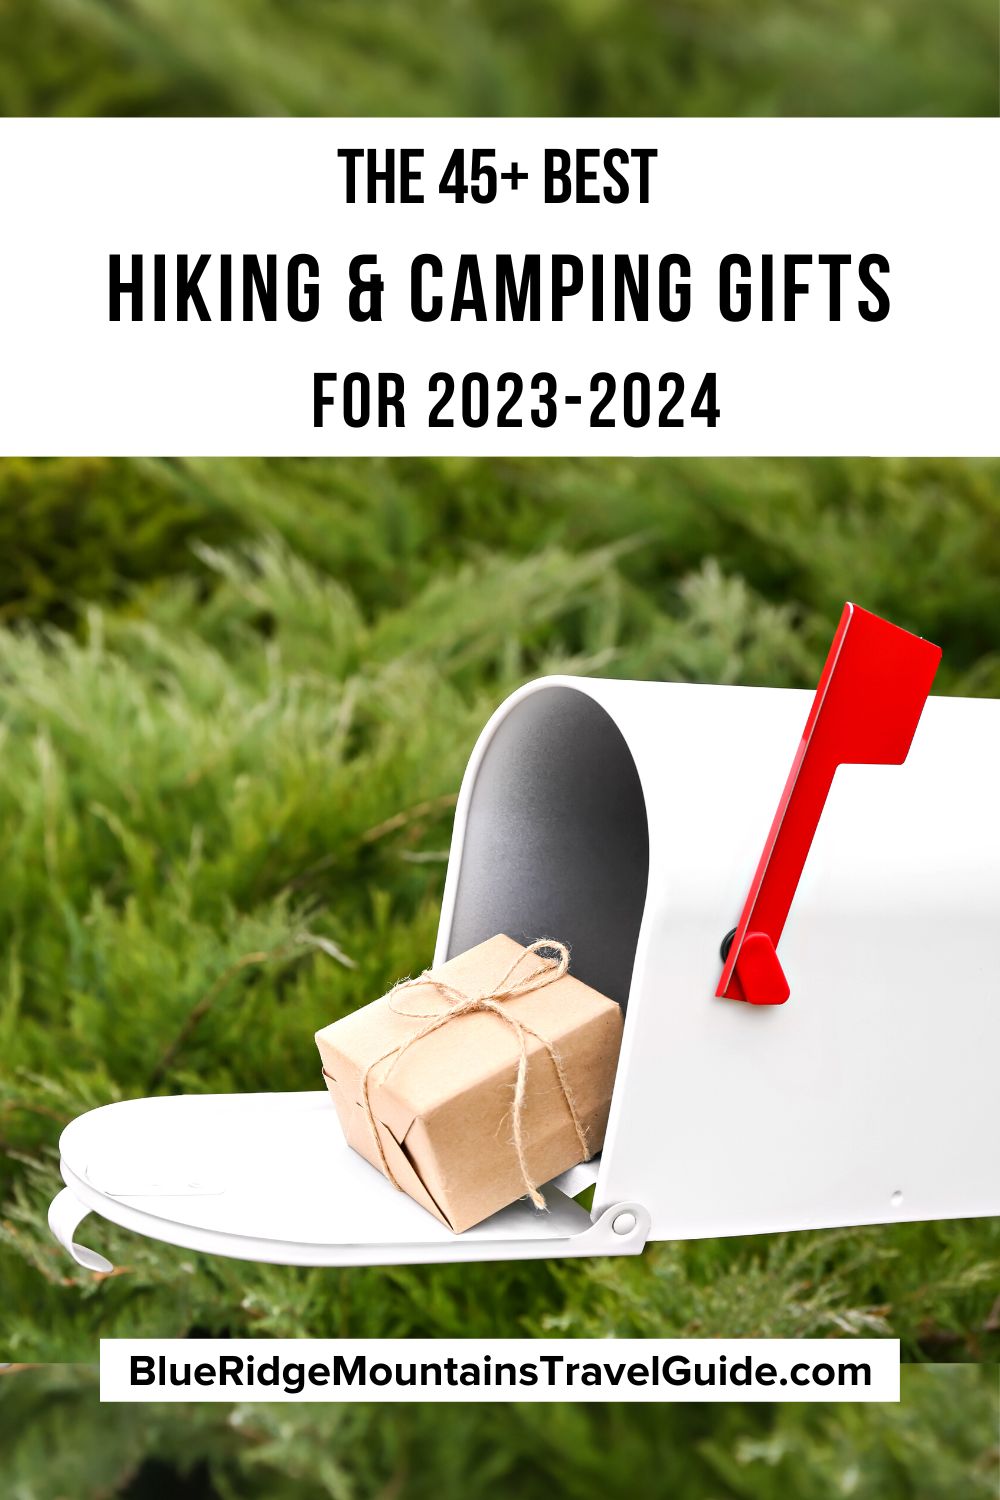 The Wishlist: 15 Best Outdoor & Camping Gifts in 2023